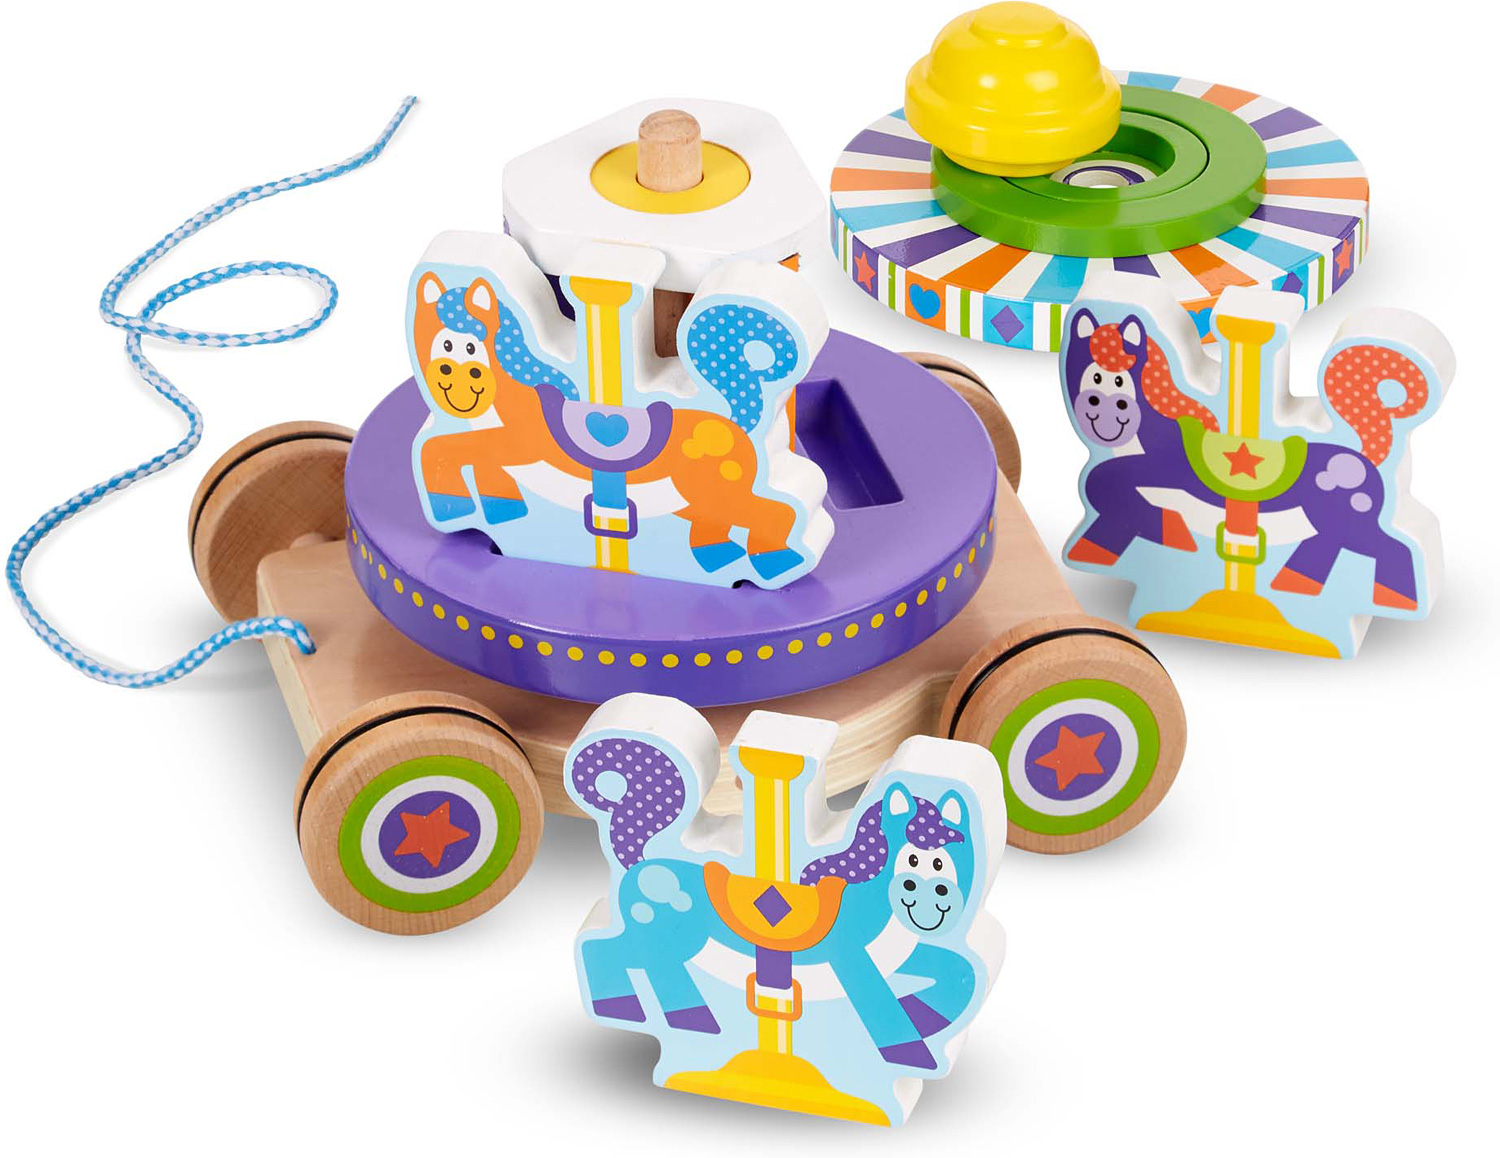 Kidscreen » Archive » Ingo and Disney partner to produce interactive toys